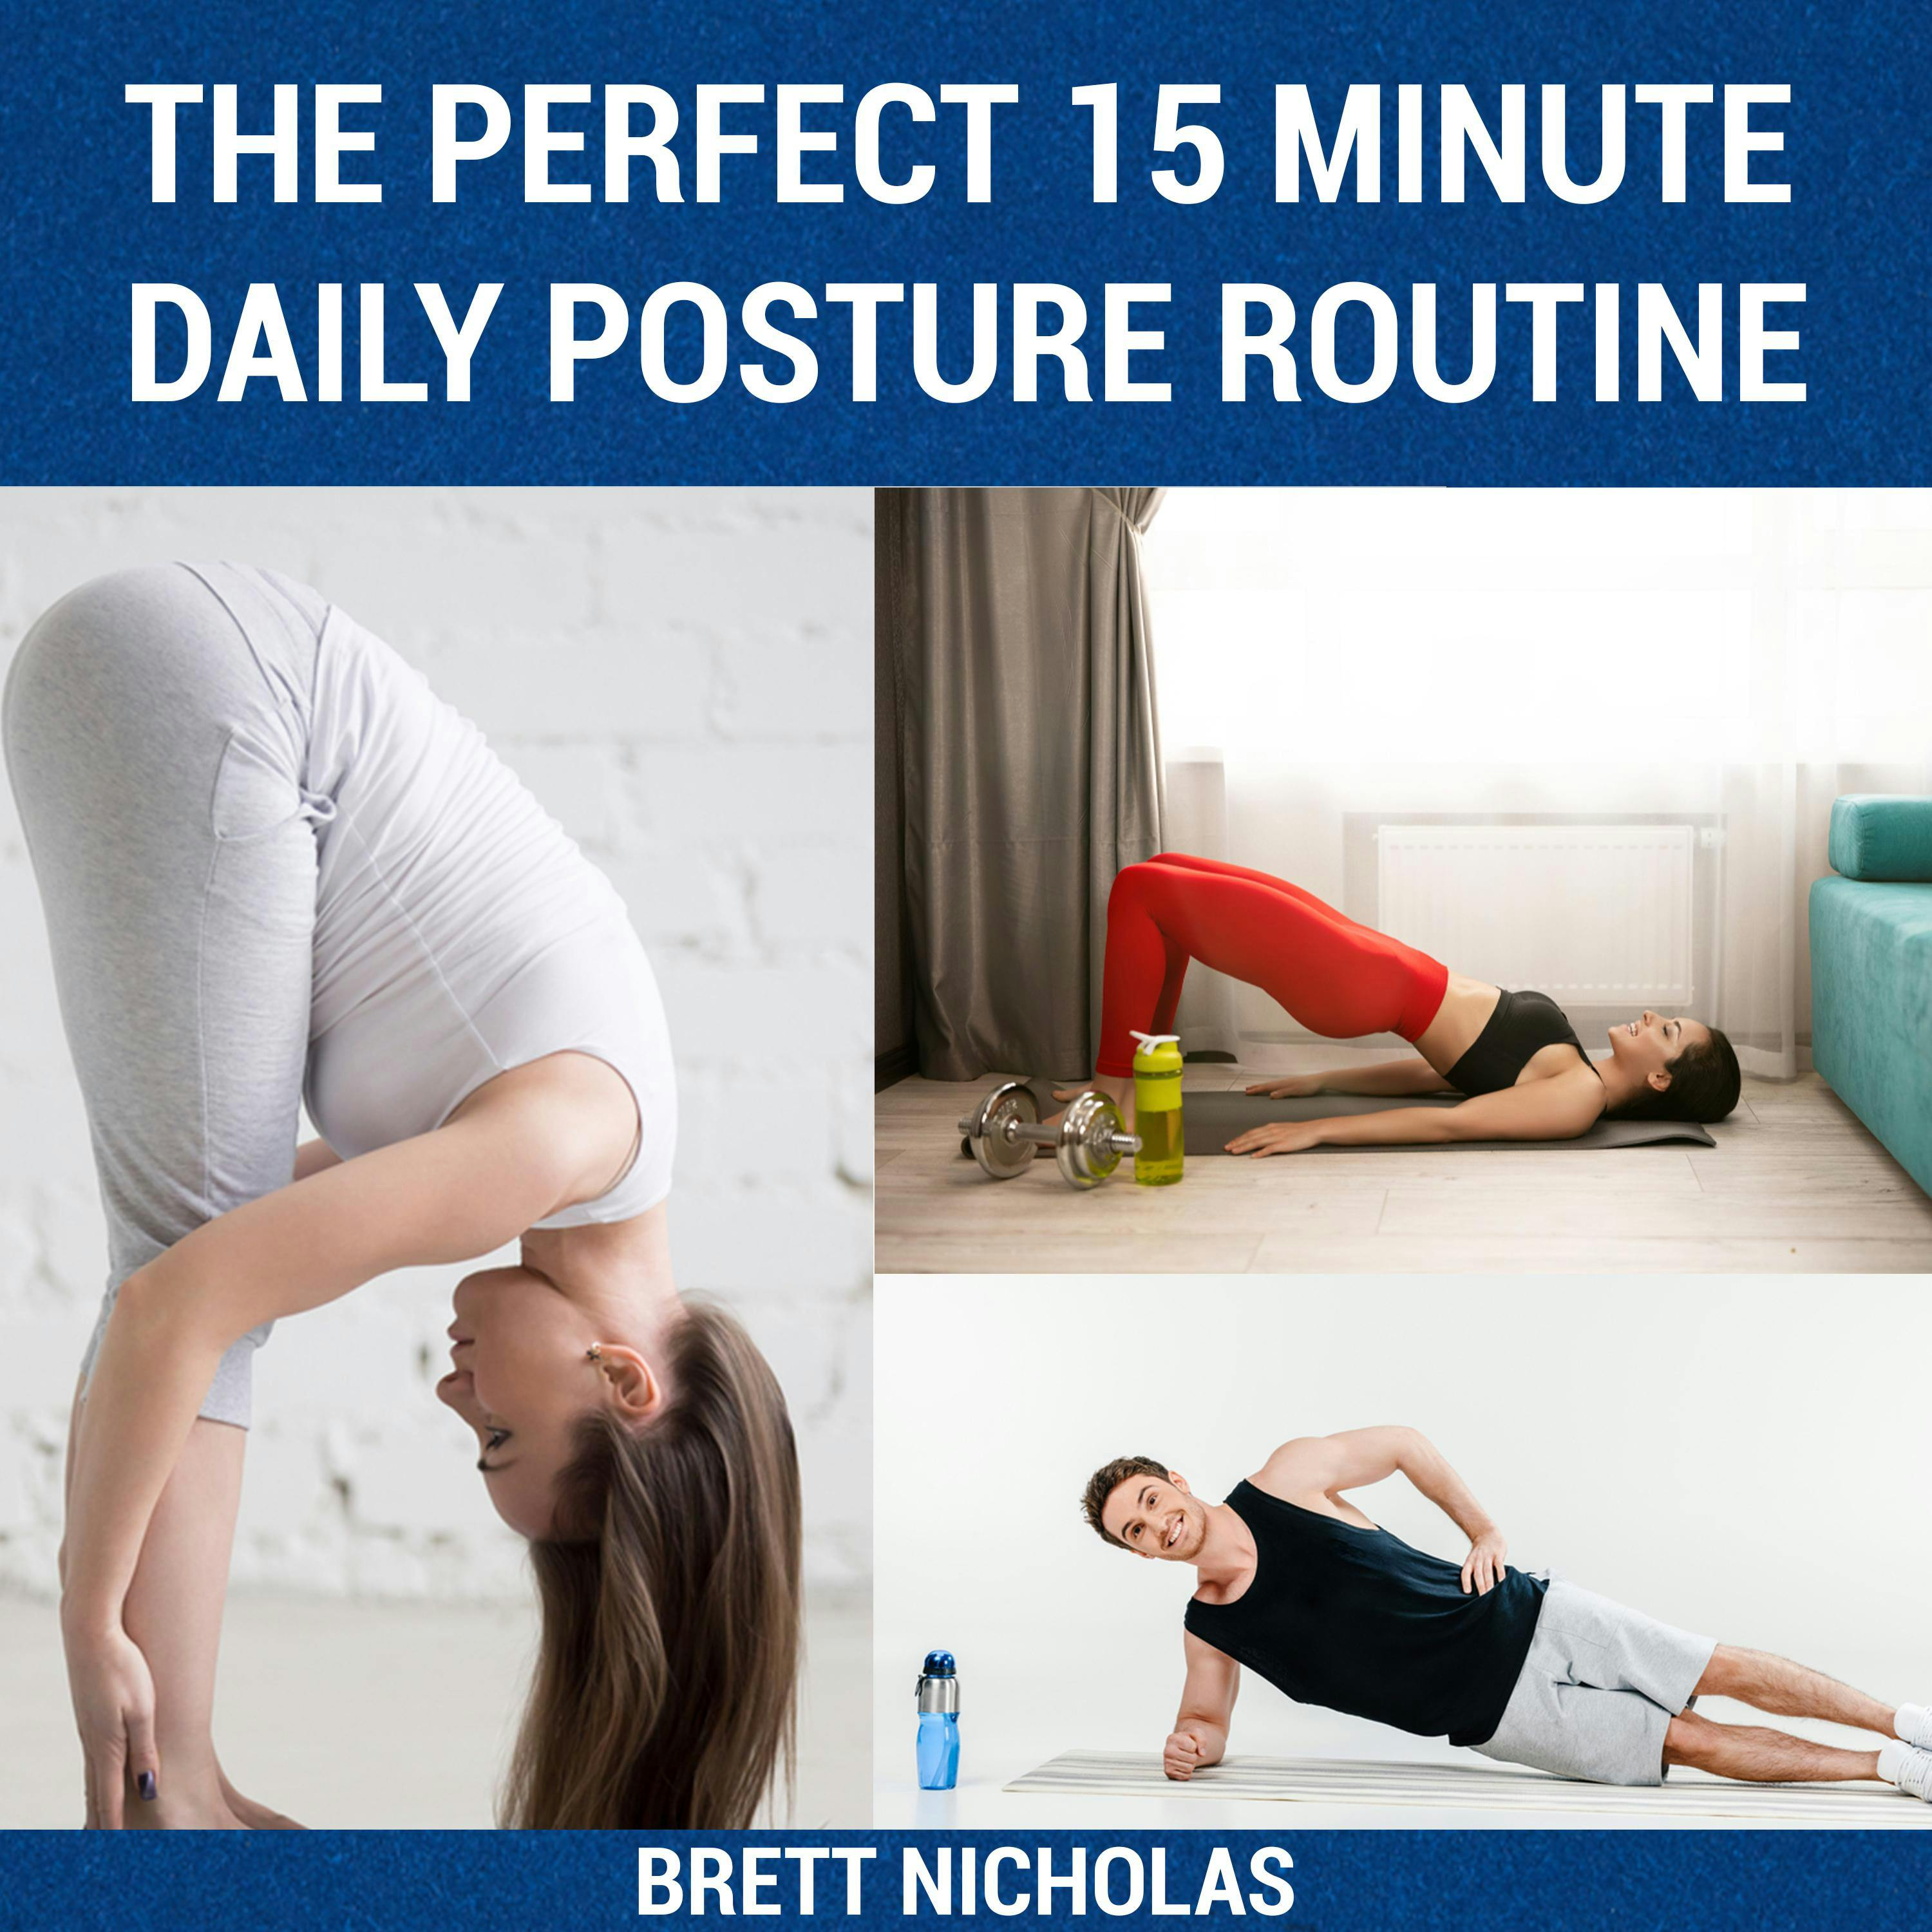 How To Improve Posture - 15 Exercises